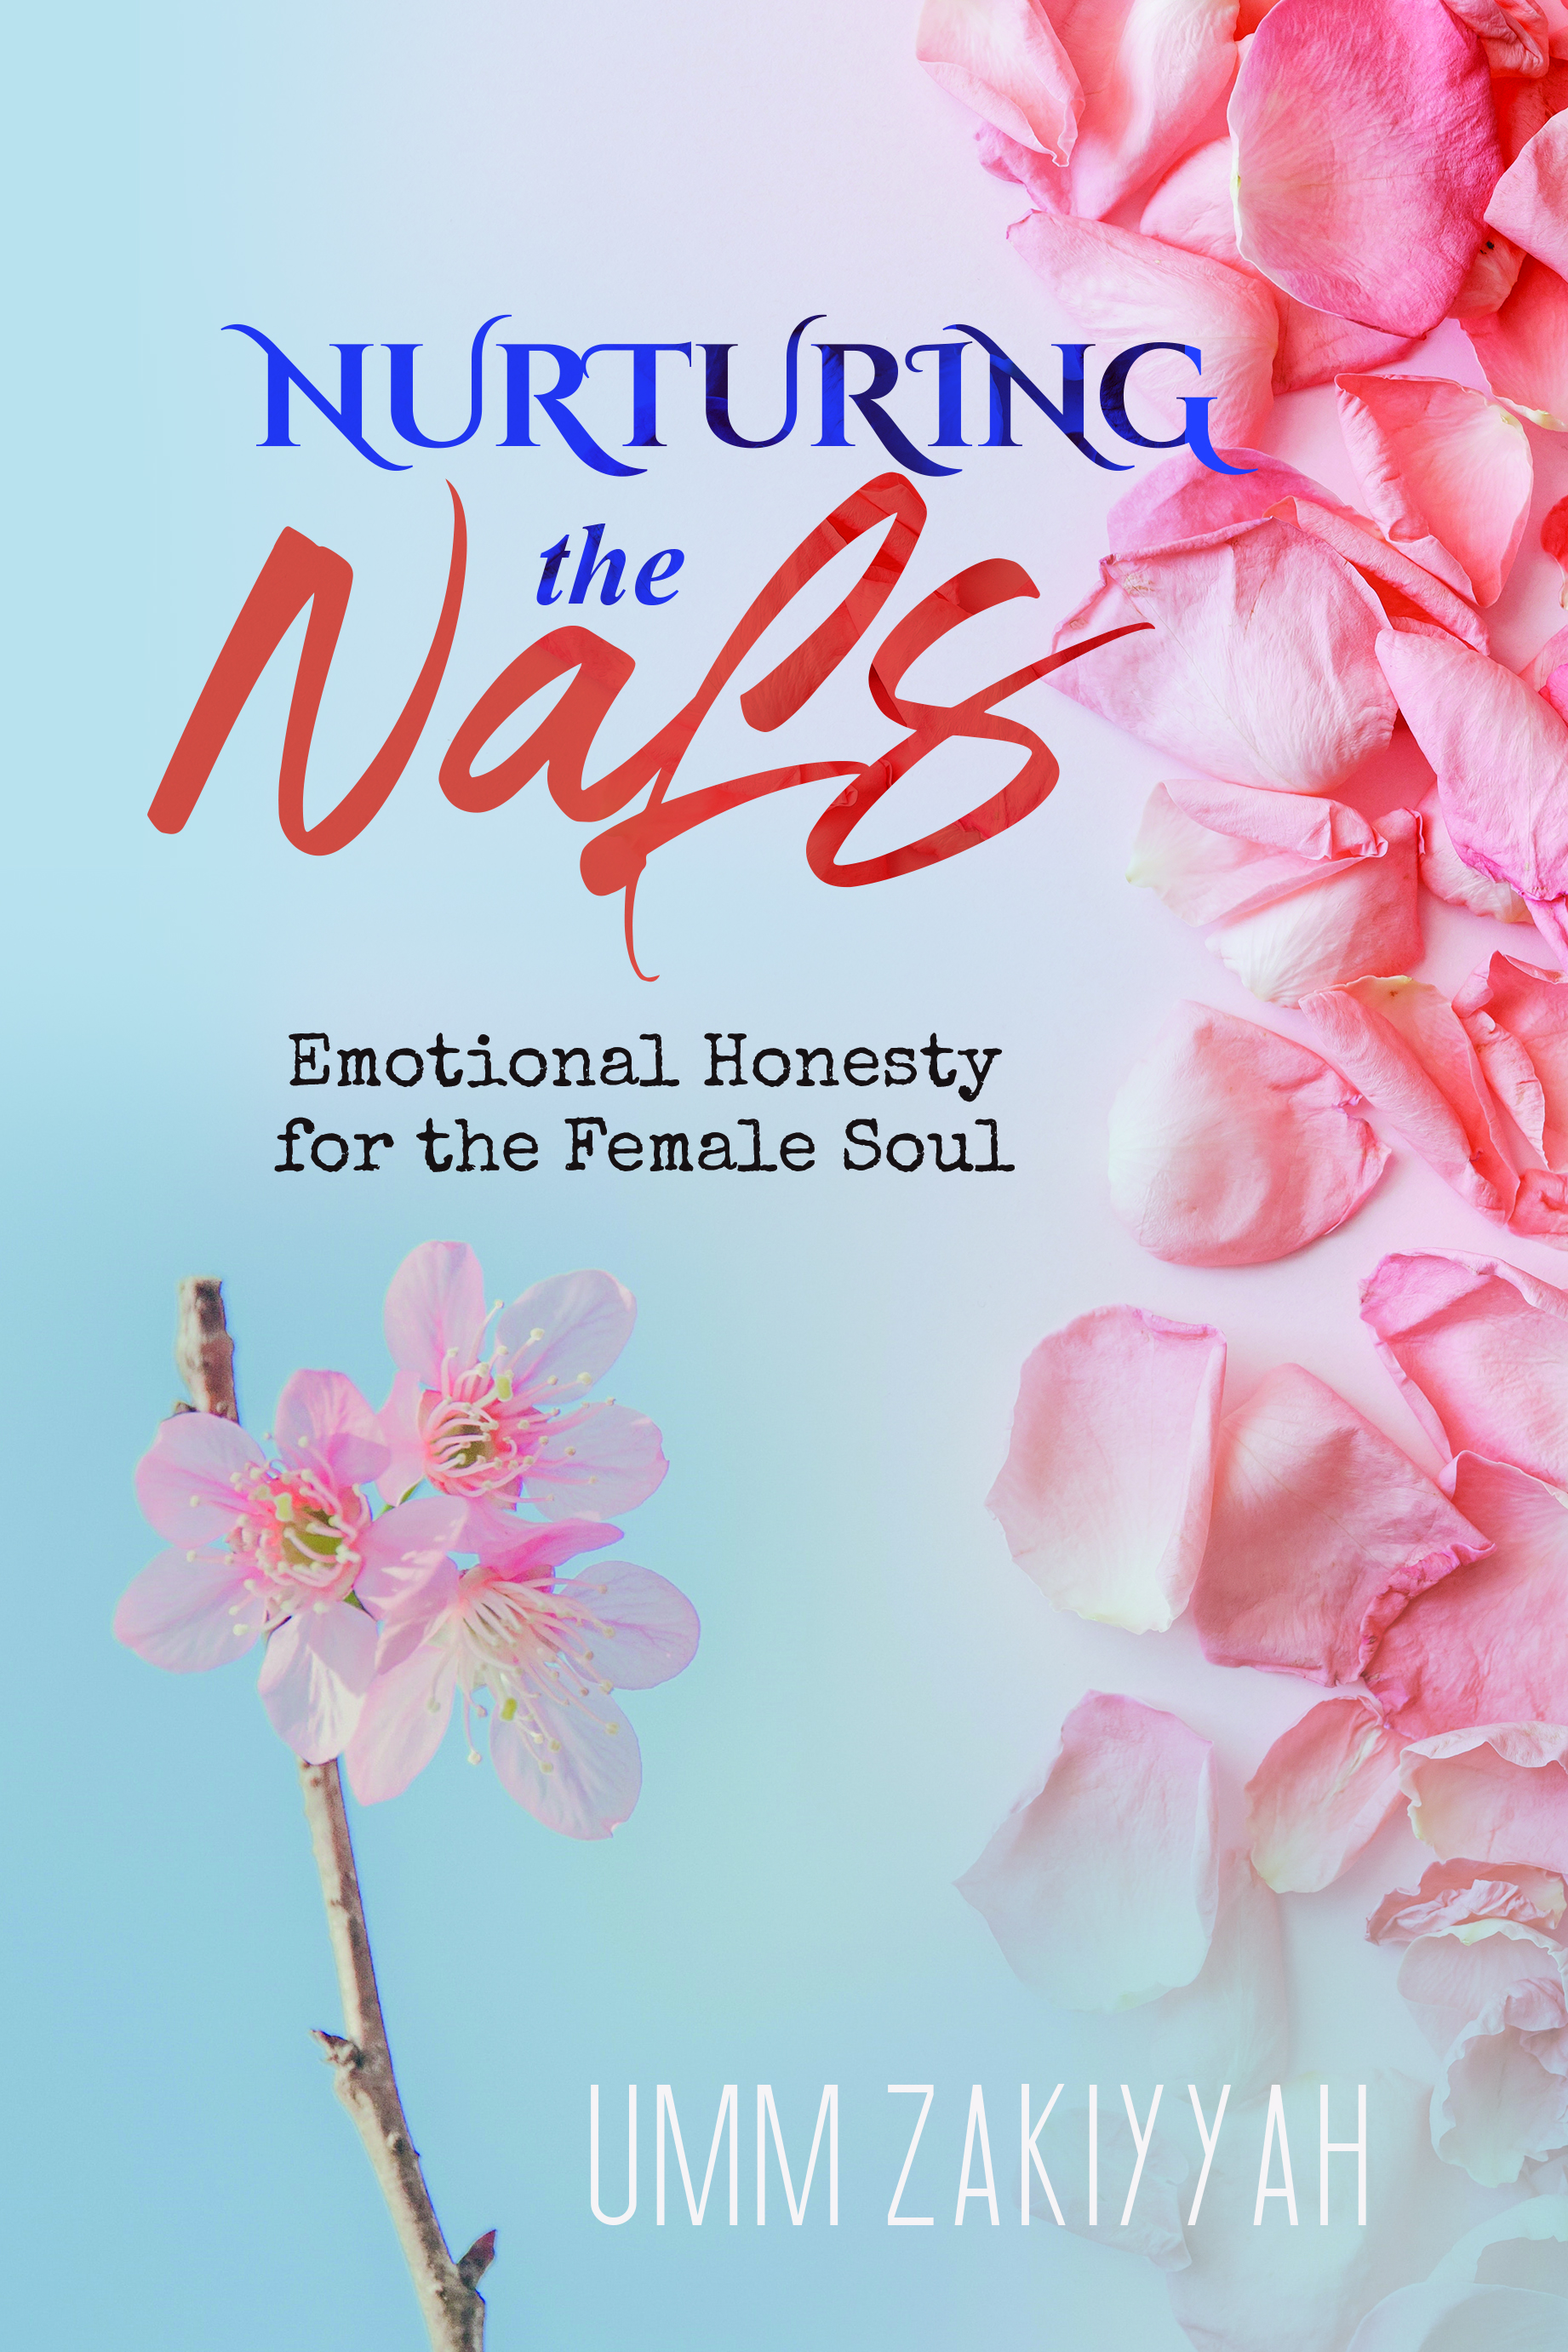 Image of Nurturing the Nafs Book Cover